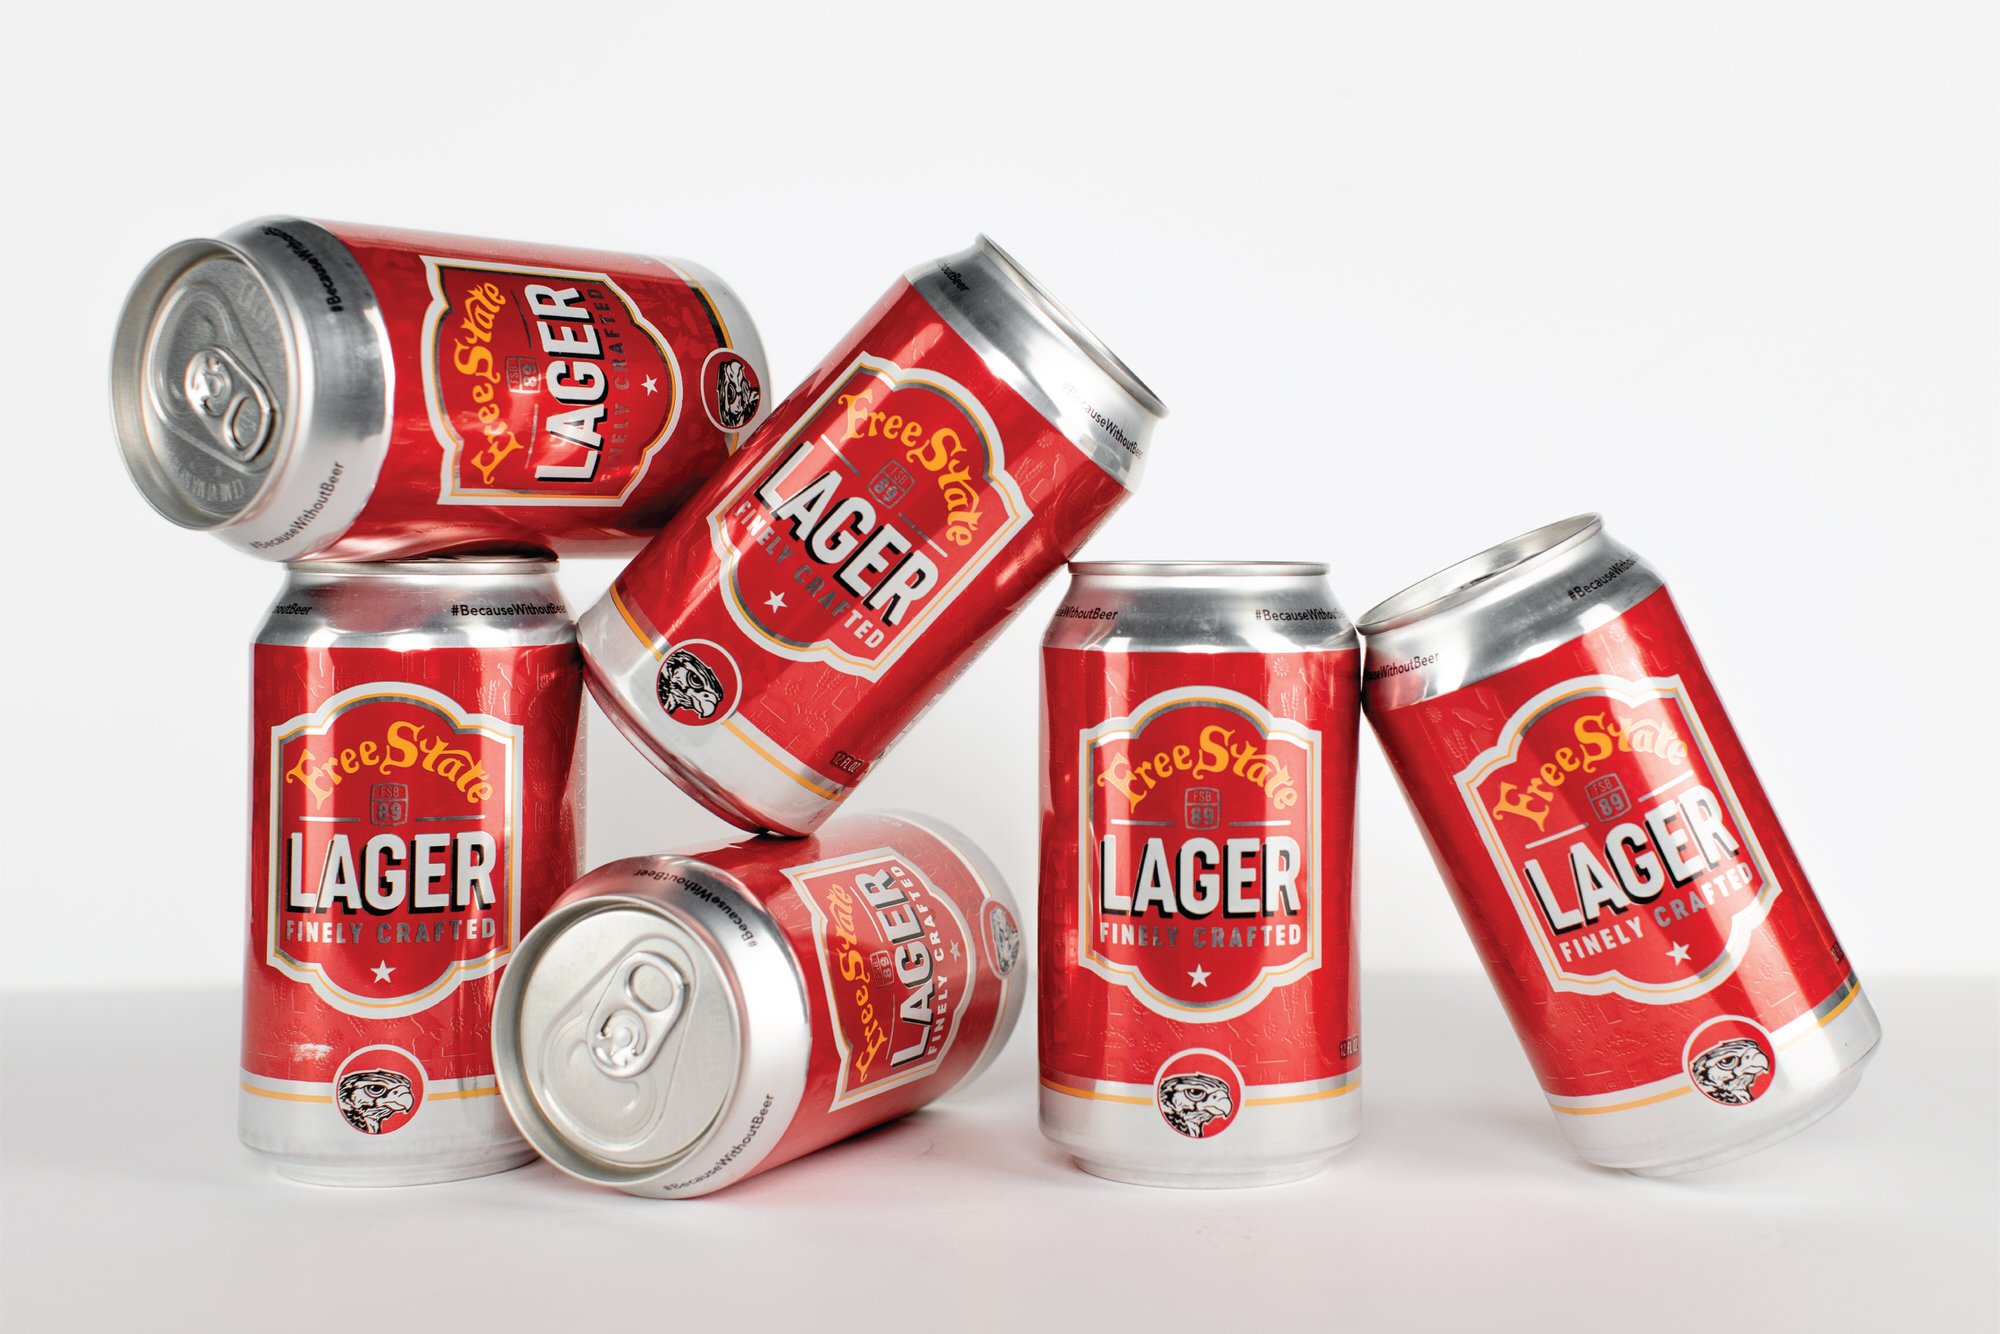 Free State Lager Cans